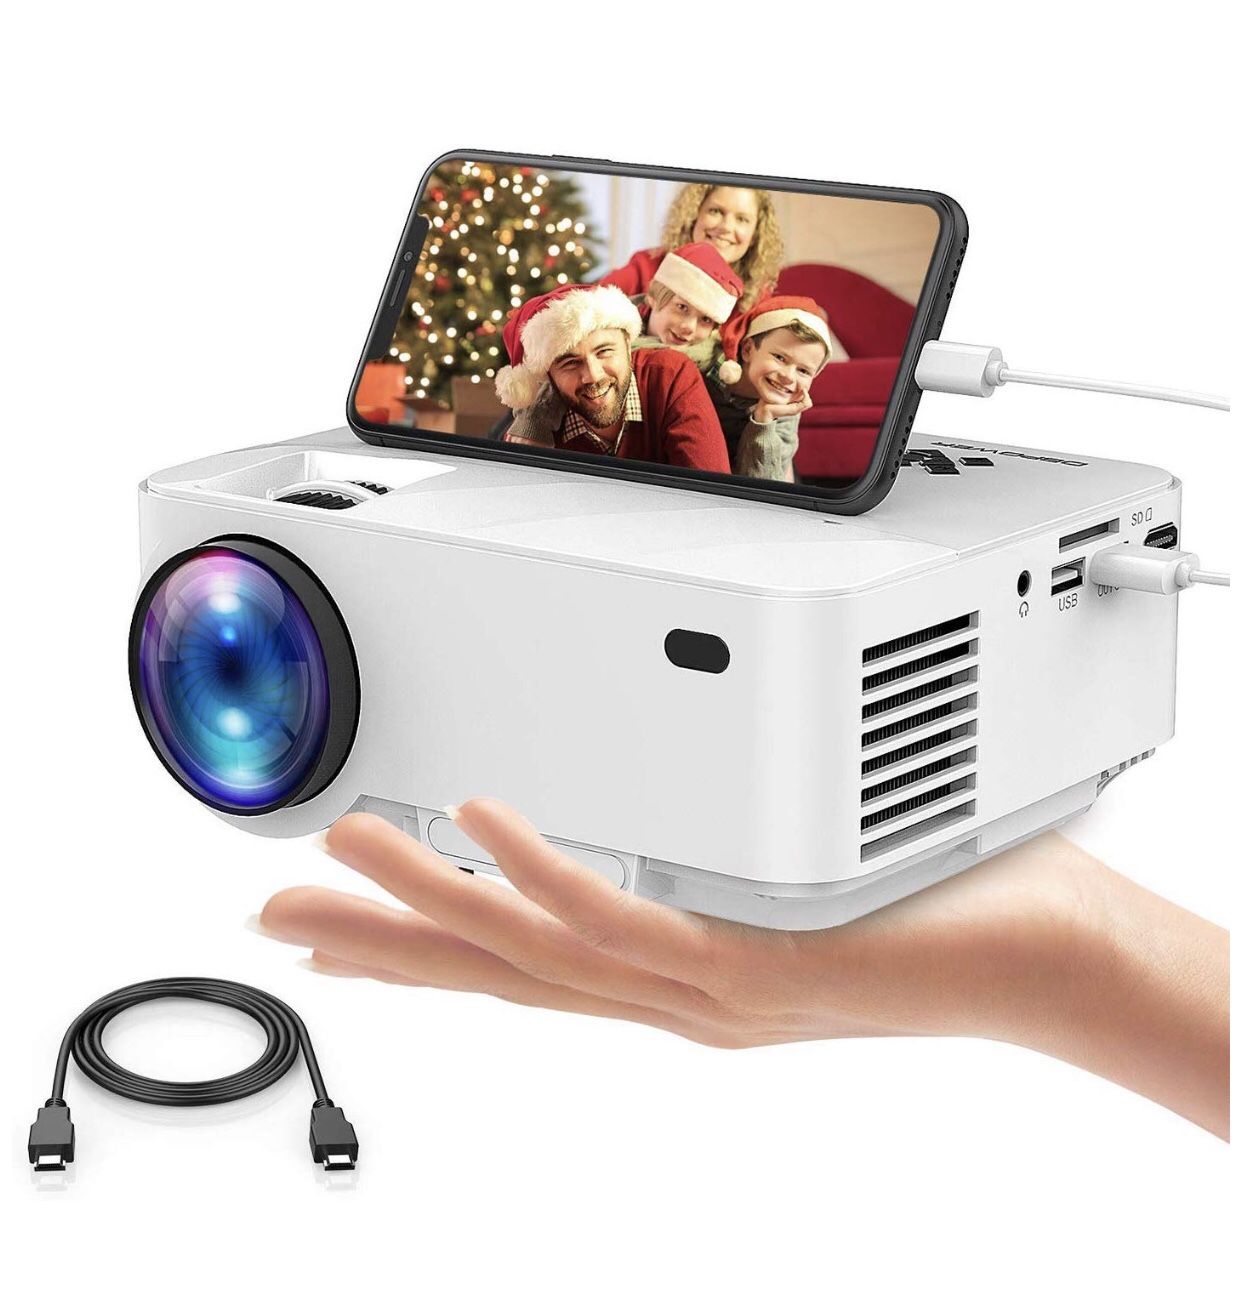 DBpower - Mini Projector, DBPOWER 2400Lux Portable Video Projector for Home Theater, Support Screen Mirror with Smartphone & Pad, 1080P/HDMI/VGA/USB/